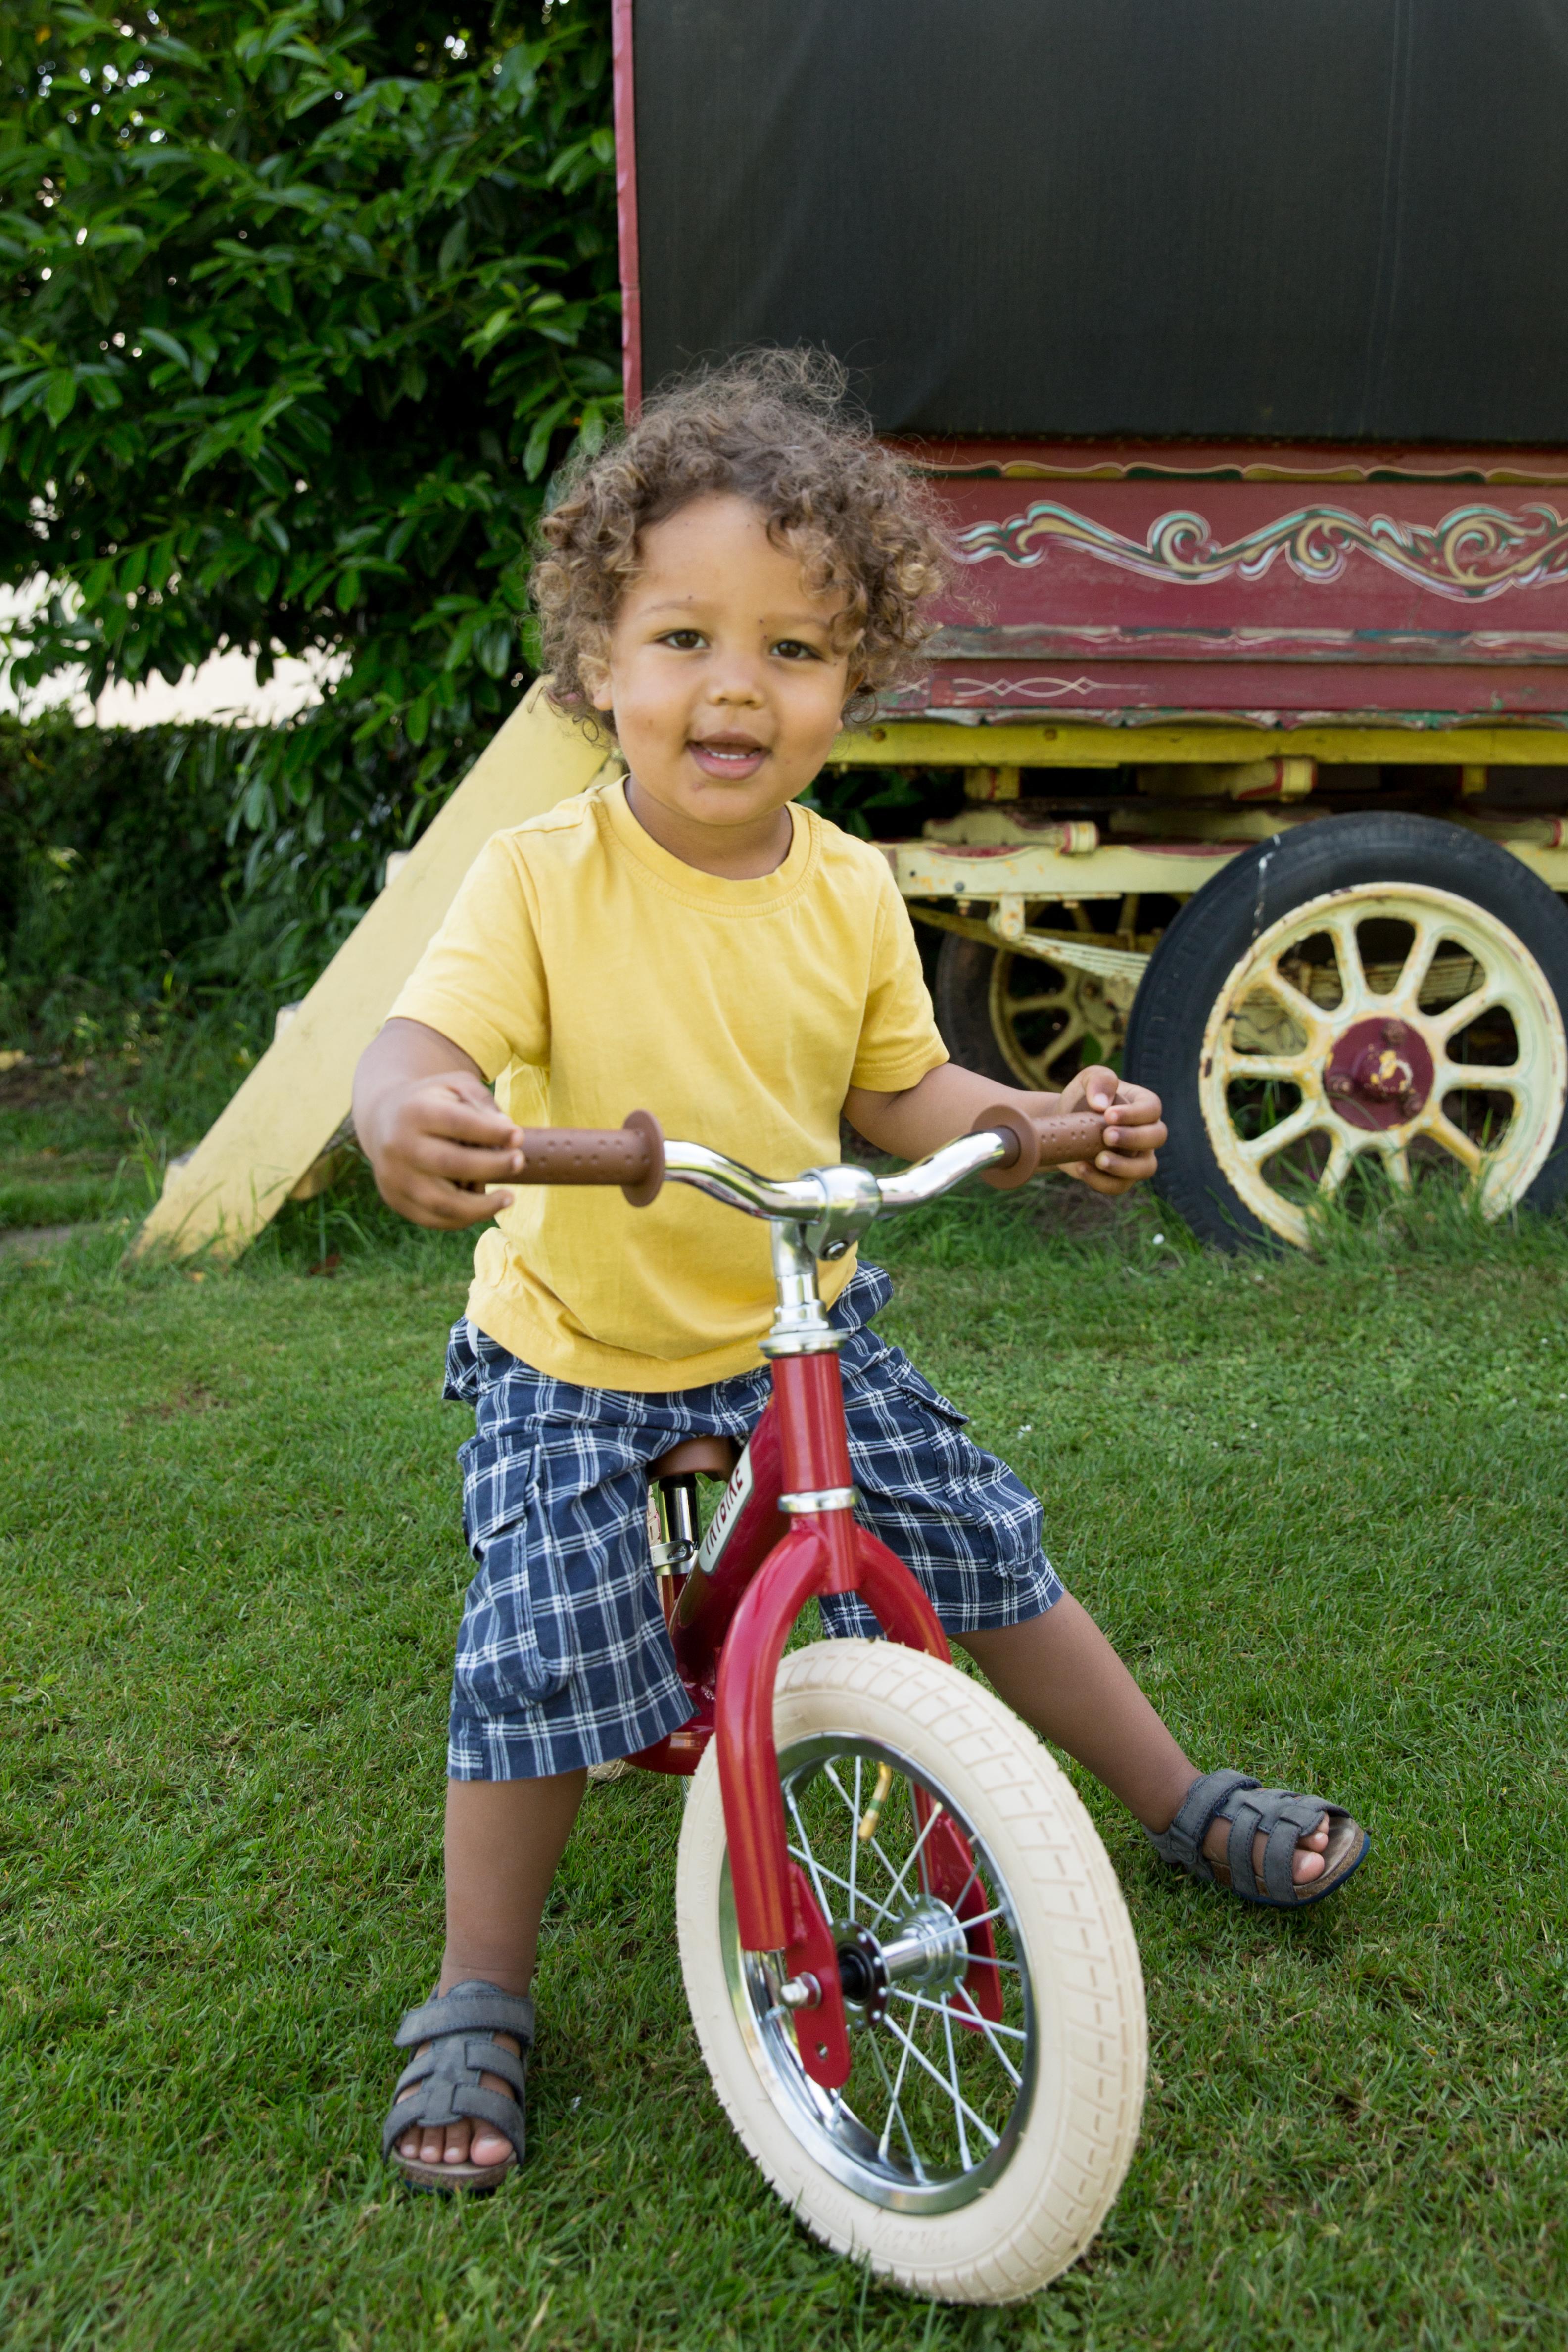 Small child in a yellow top on a Trybike made into a balance bike.